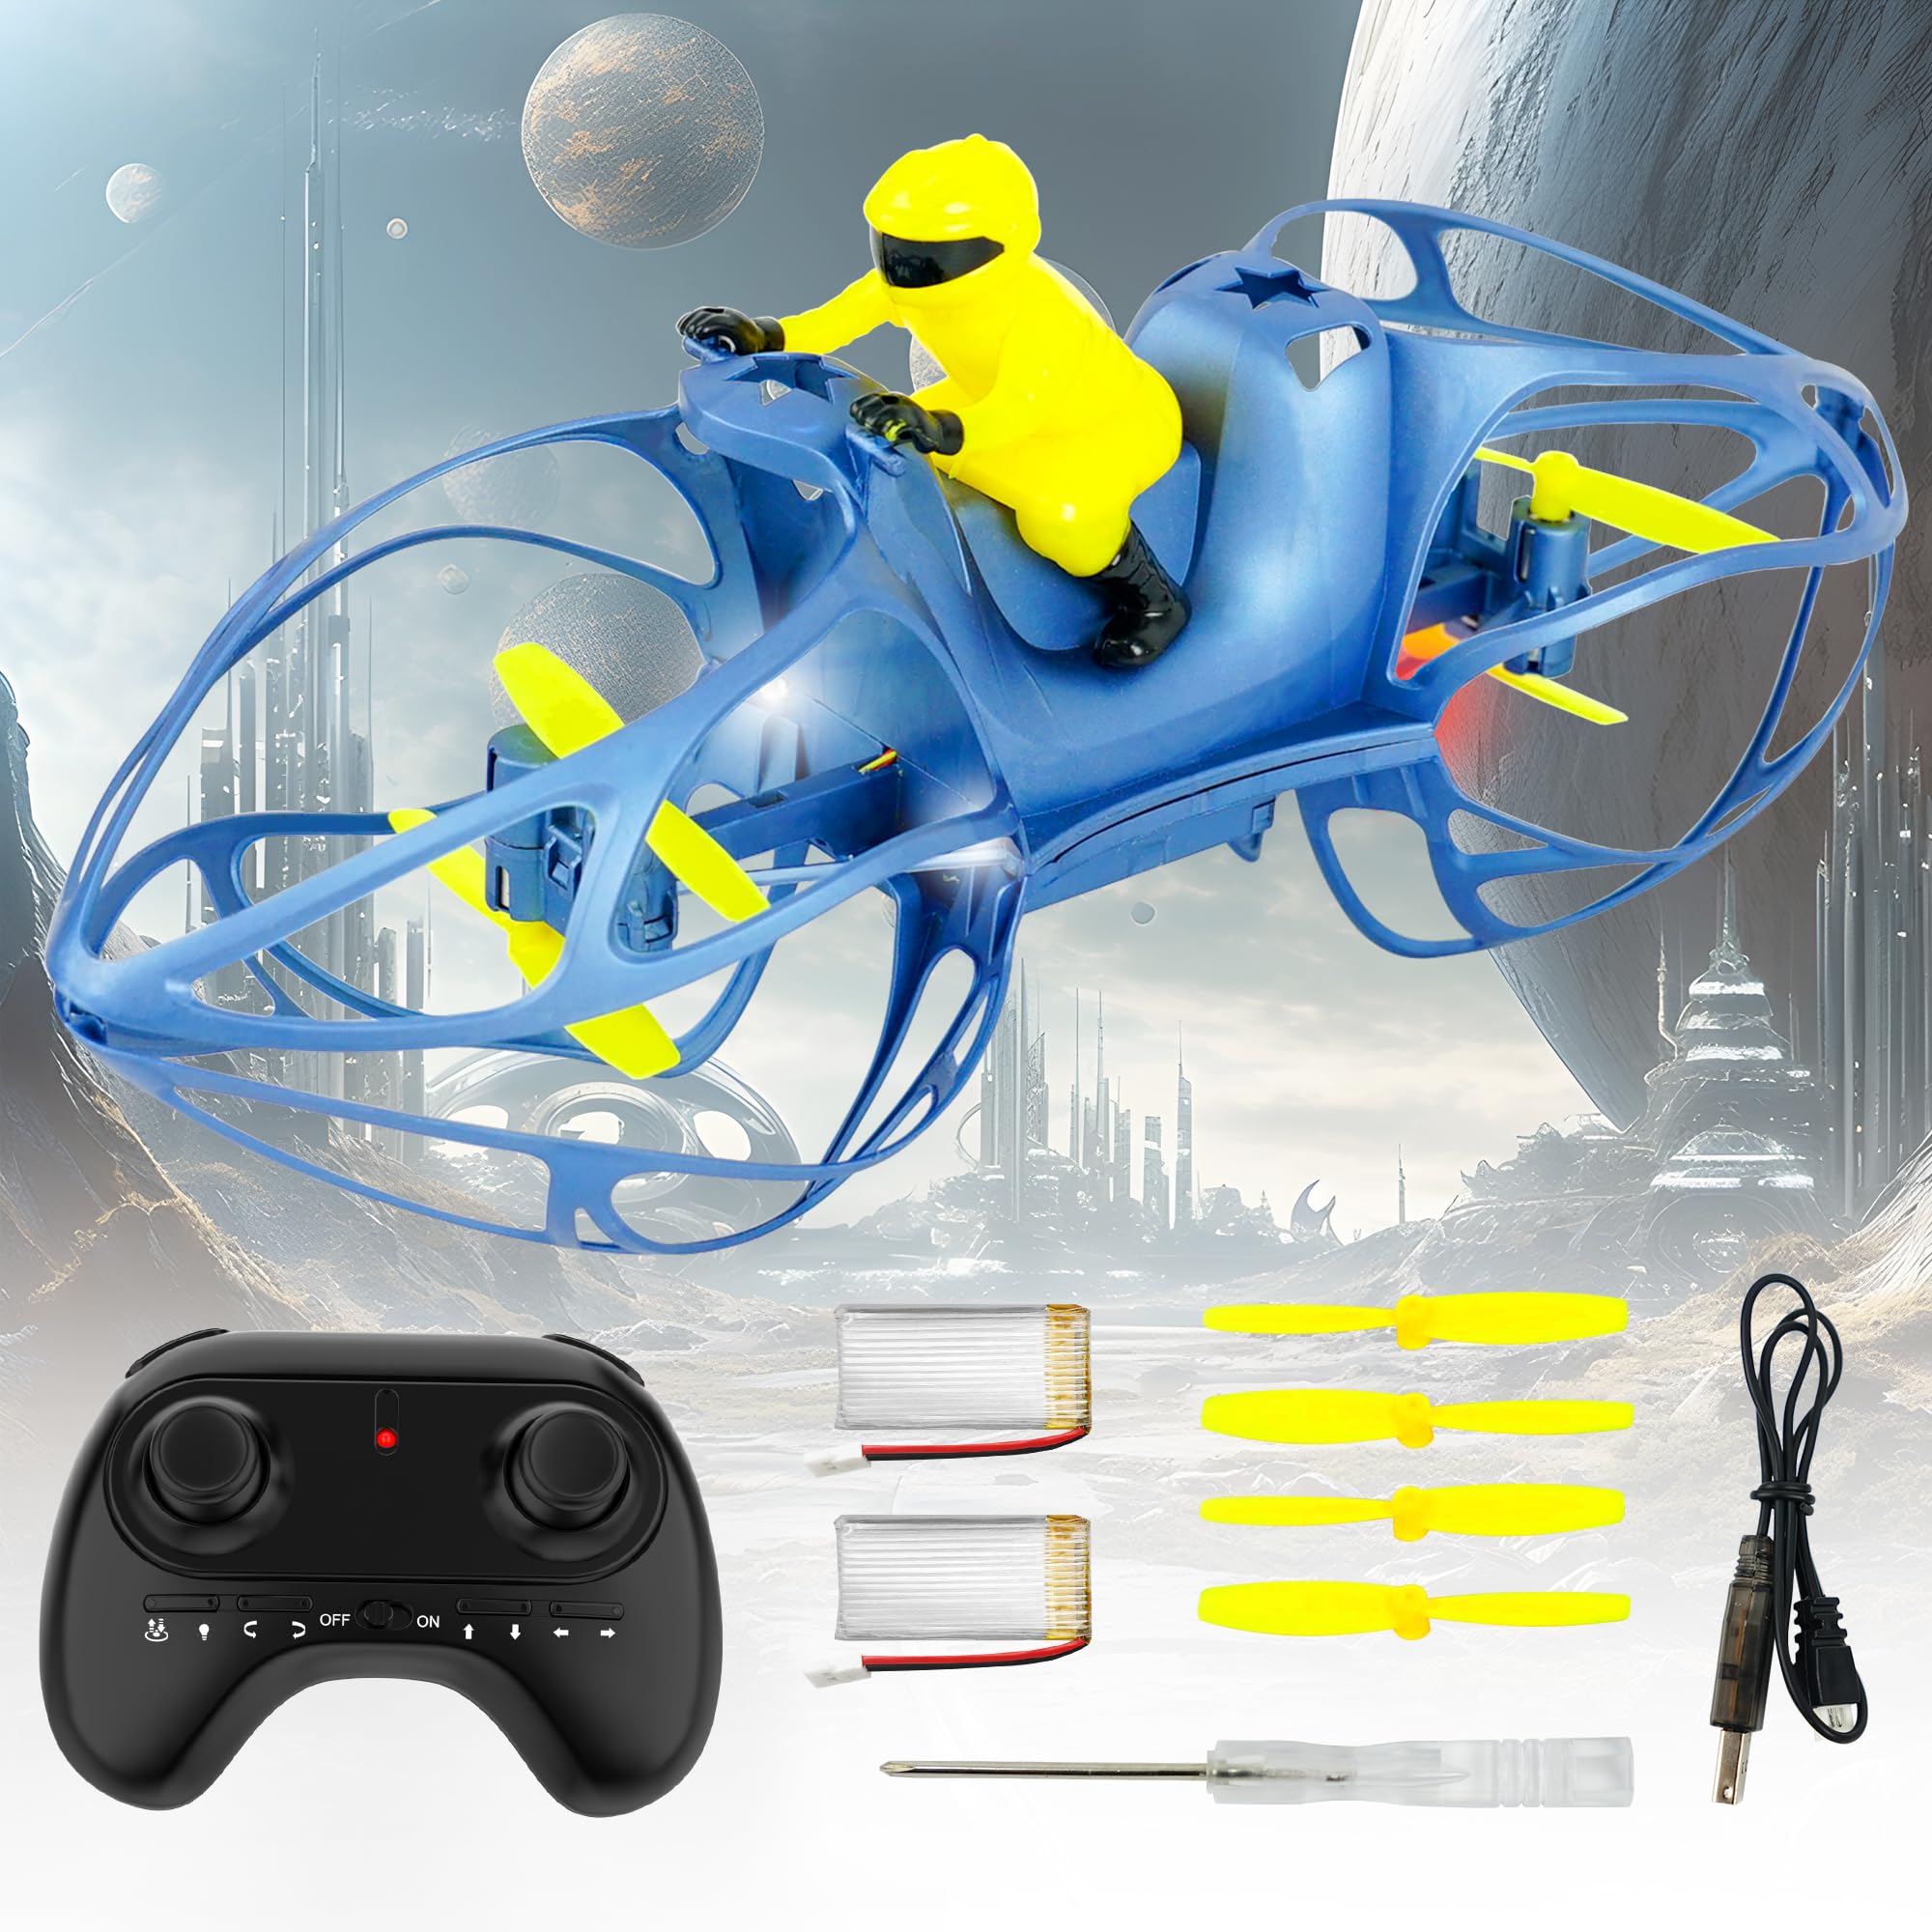 BEZGAR Remote Control Dinosaur Toys for Kids – Flying RC Drone for Beginners Gift, Altitude Hold, Headless Mode, LED Light, One Key Fly/Land Speed Adjustment with 2 Batteries, Mini Drone Toys Birthday Gifts for Boys and Girls 4 6-8 8-12